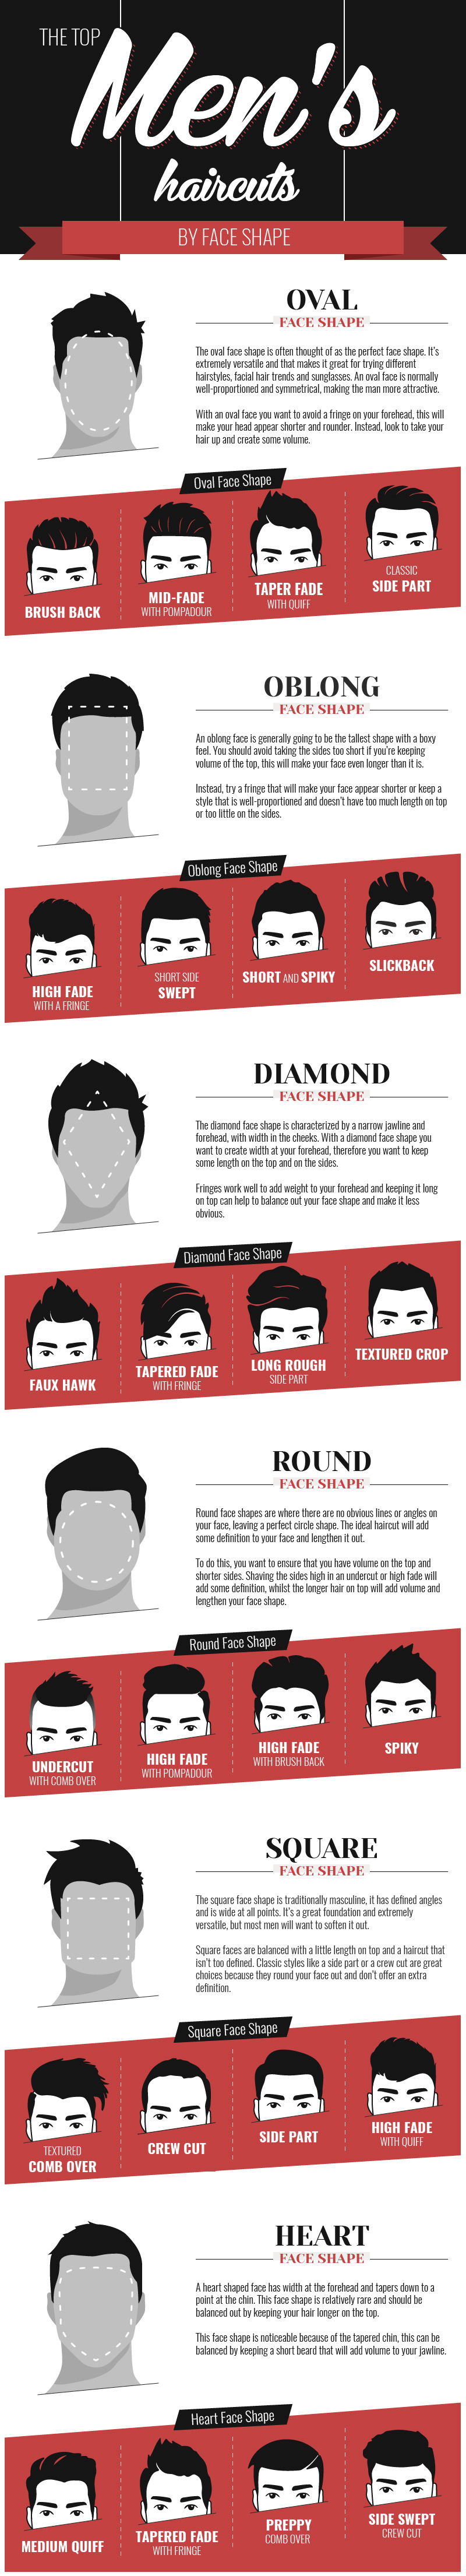 Guy Guide The Best Hairstyles According To Your Face Shape